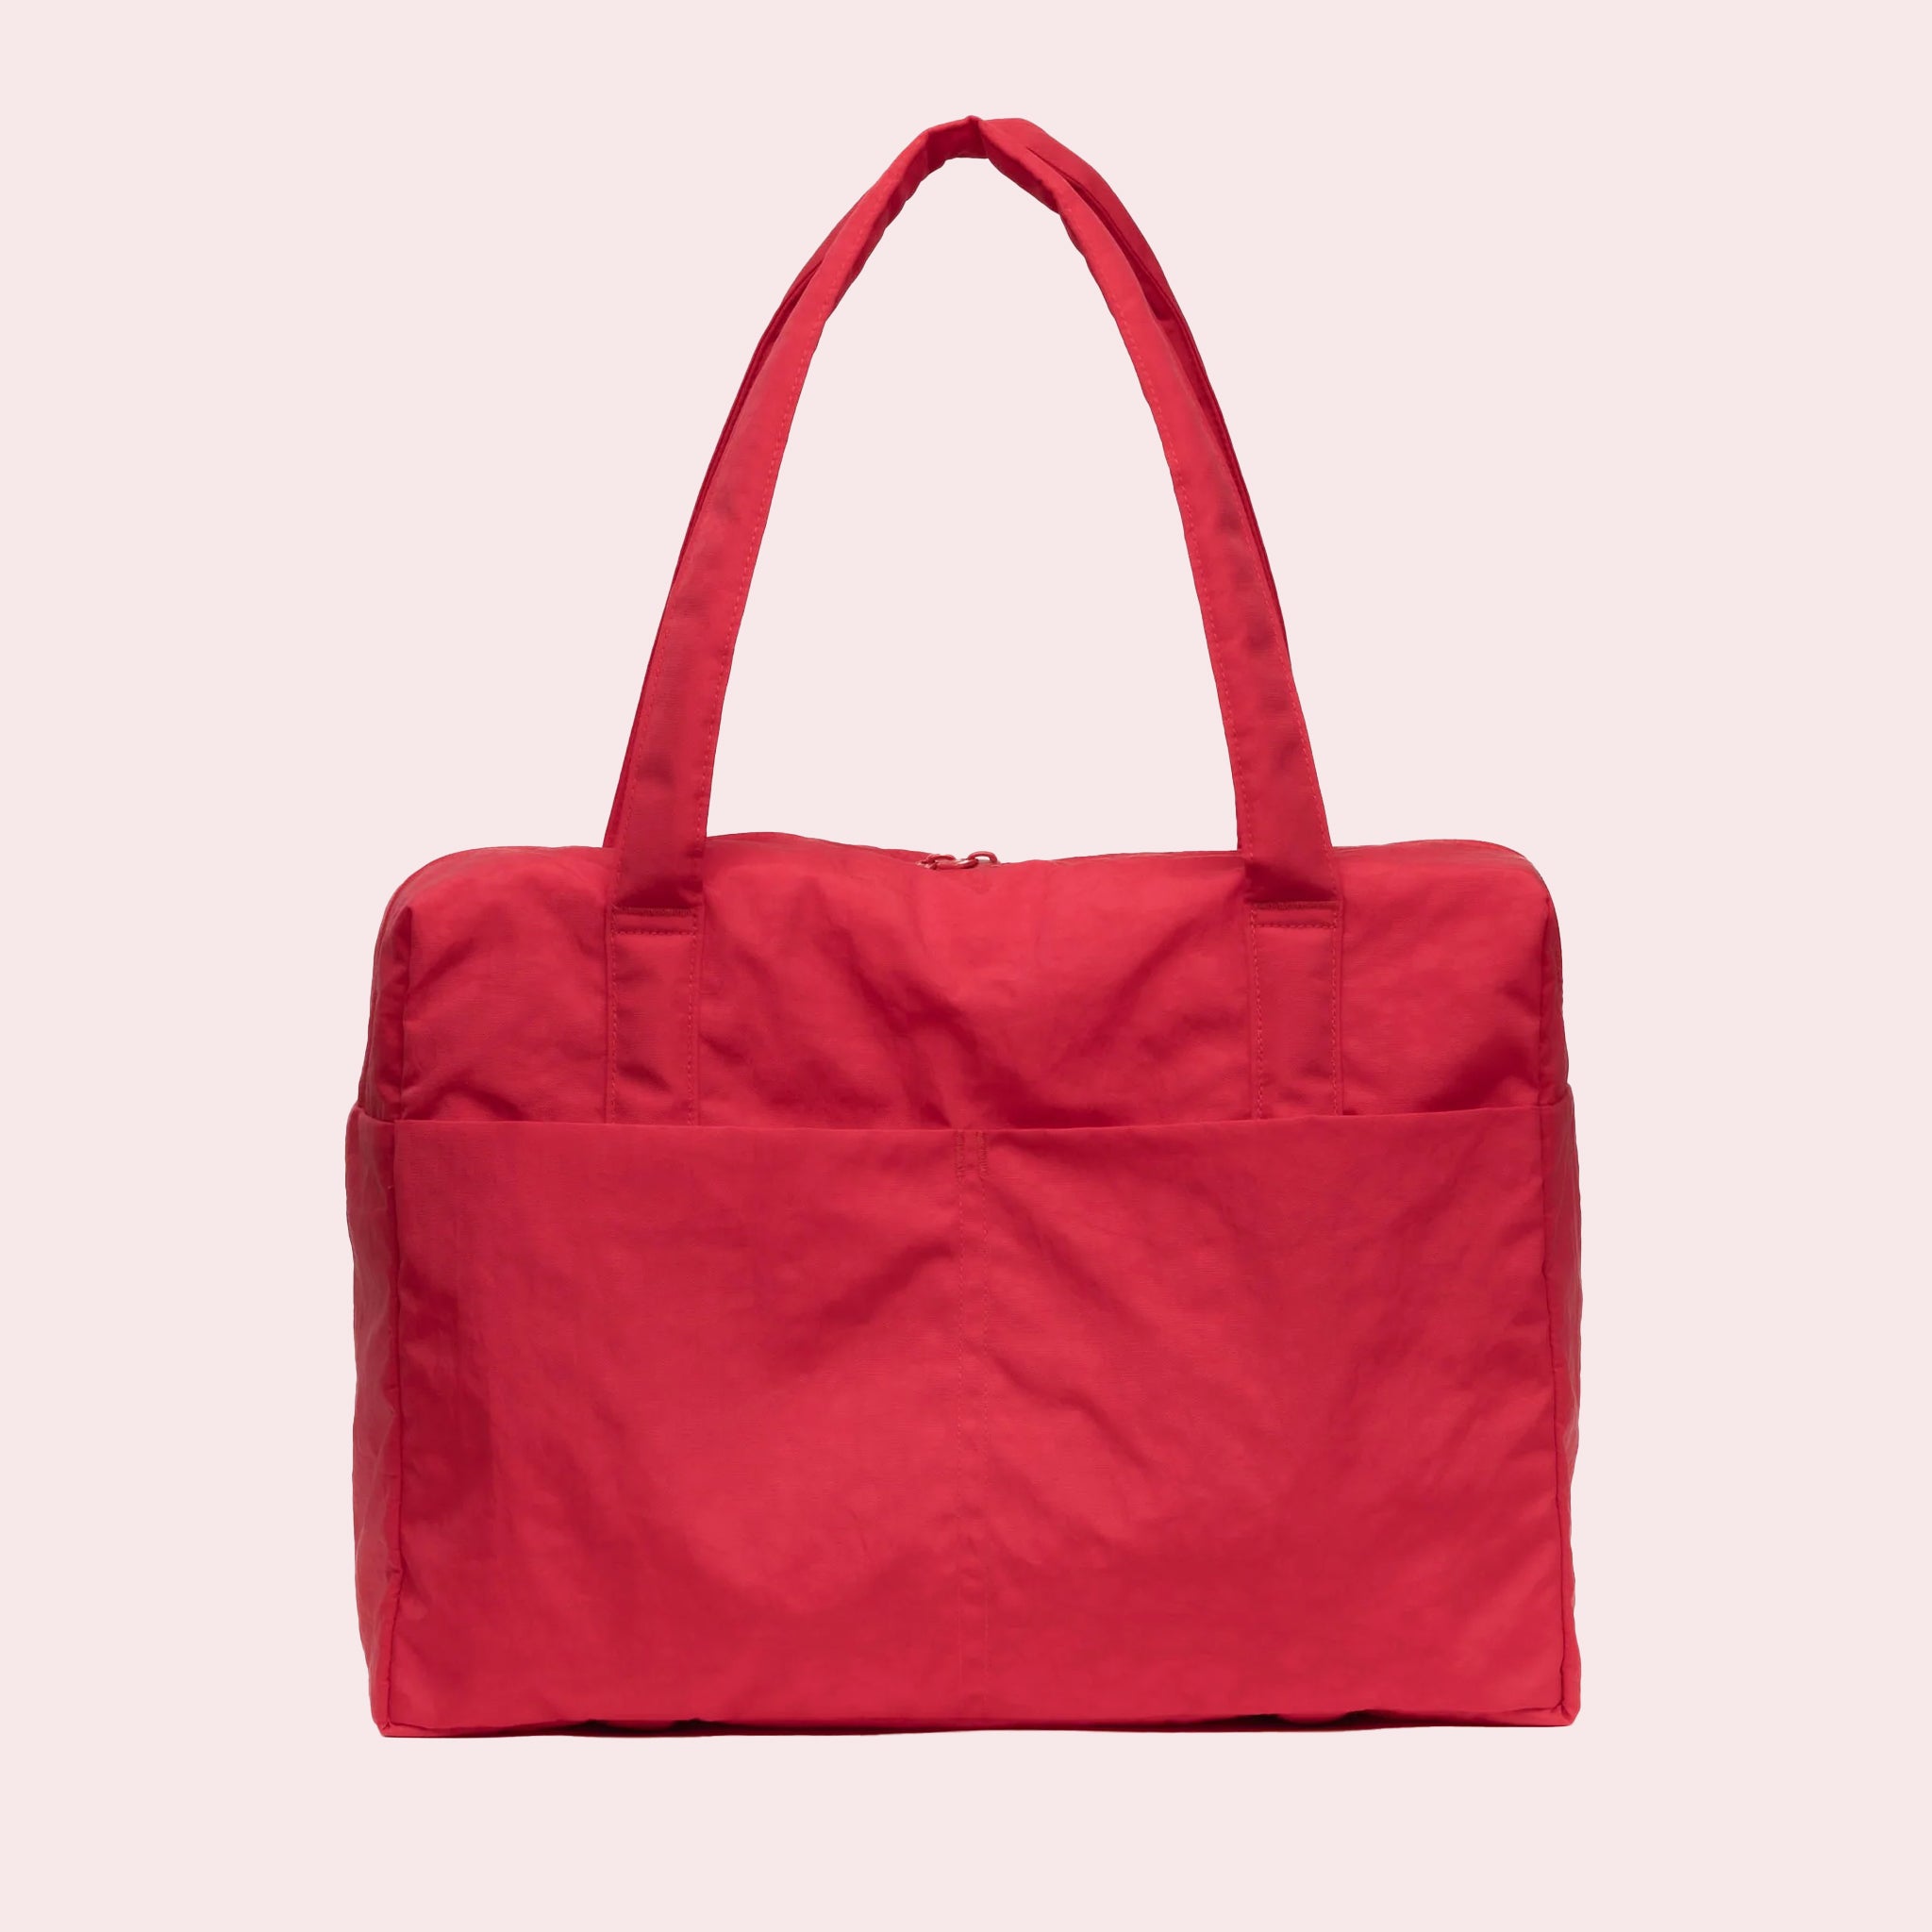 A red nylon carry on tote bag with two handles and a zipper top. 